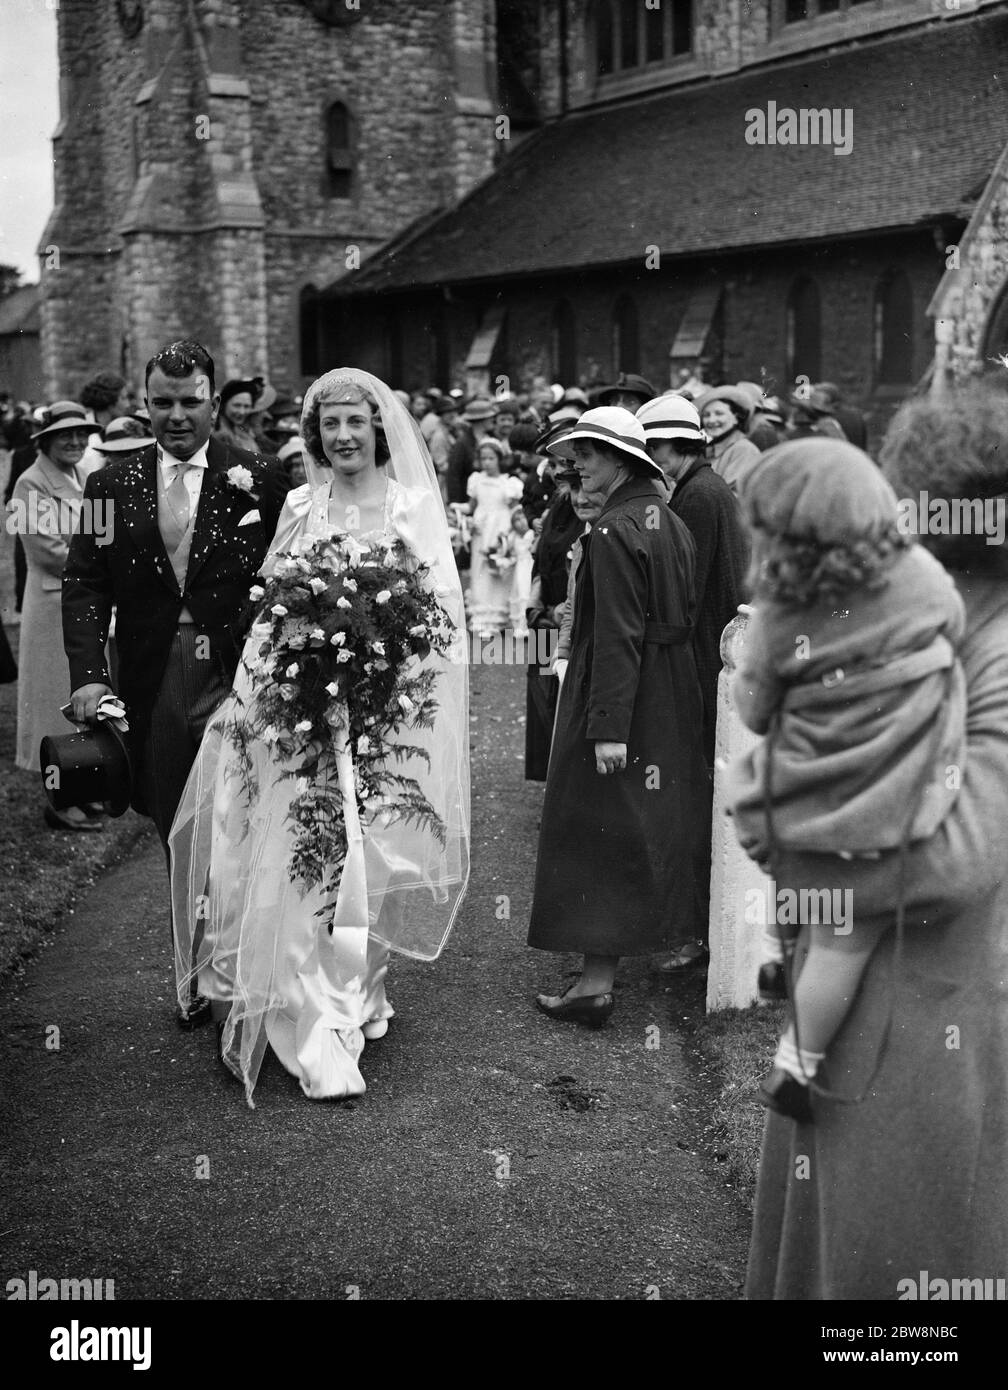 The wedding of Thorn and E Barker . 1938 Stock Photo